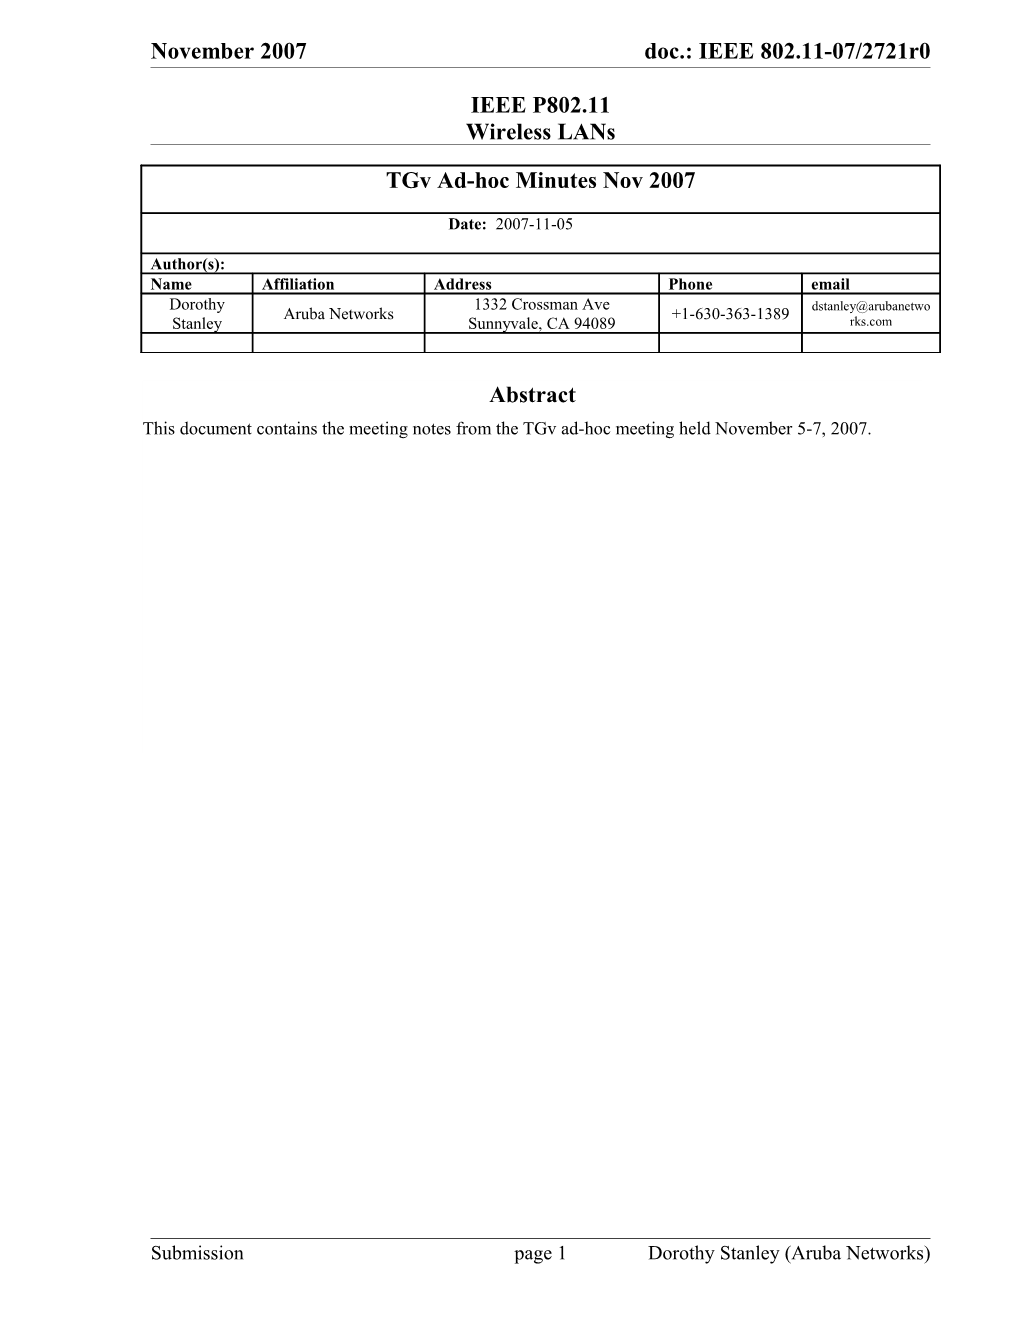 1. Call to Order, Patent Notification - IEEE Patent Policy -